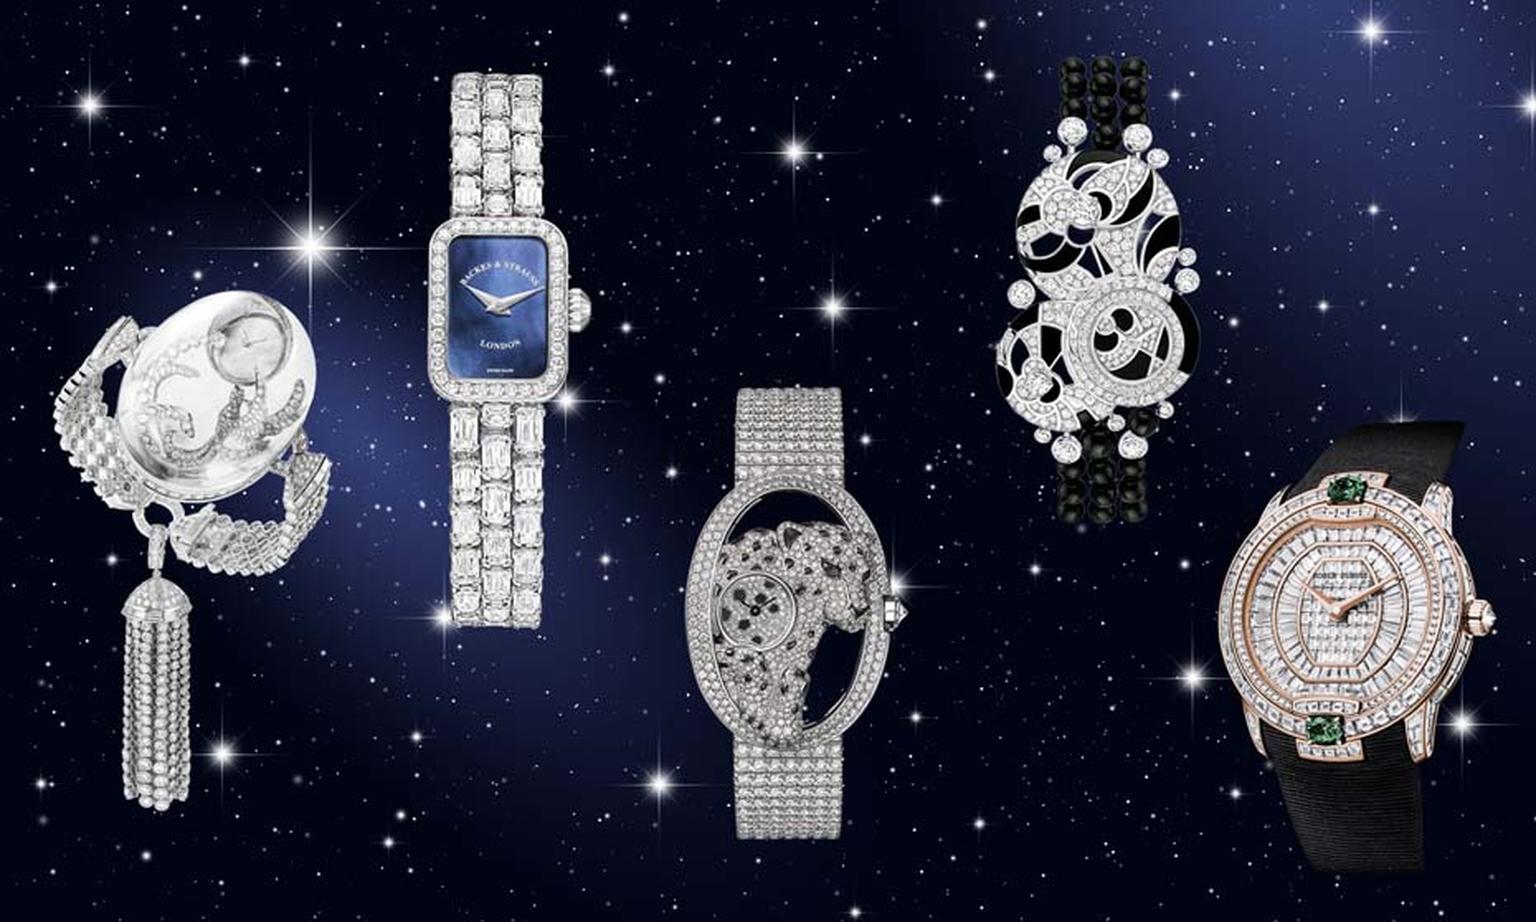 Light up the longest nights of the year with these dazzling diamond high jewellery watches from Boucheron, Backes & Strauss, Cartier, Chanel and Roger Dubuis.